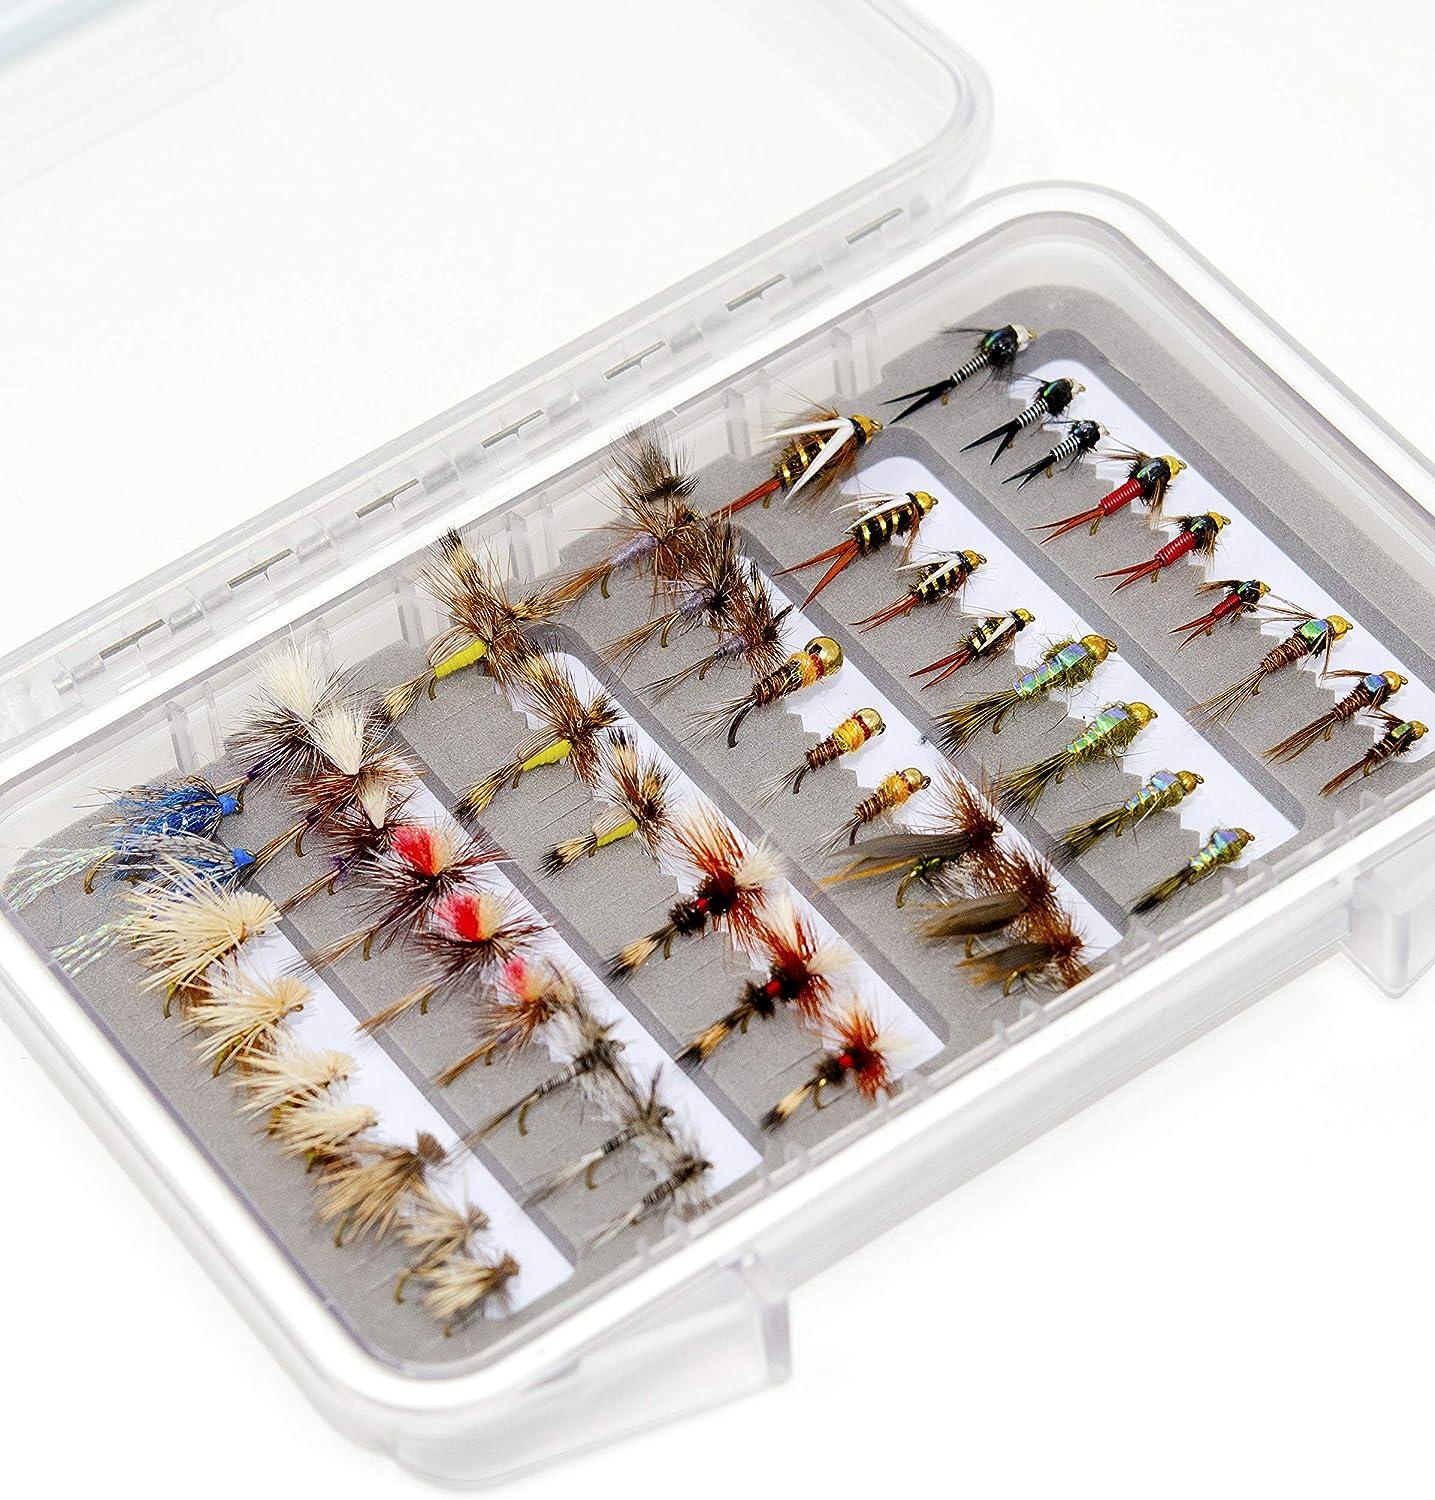 Outdoor Planet Premium Fly Fishing Flies Assortment, Waterproof Fly Box, Dry, Wet, Nymphs, Streamers, Wooly Buggers, Hopper, Caddis